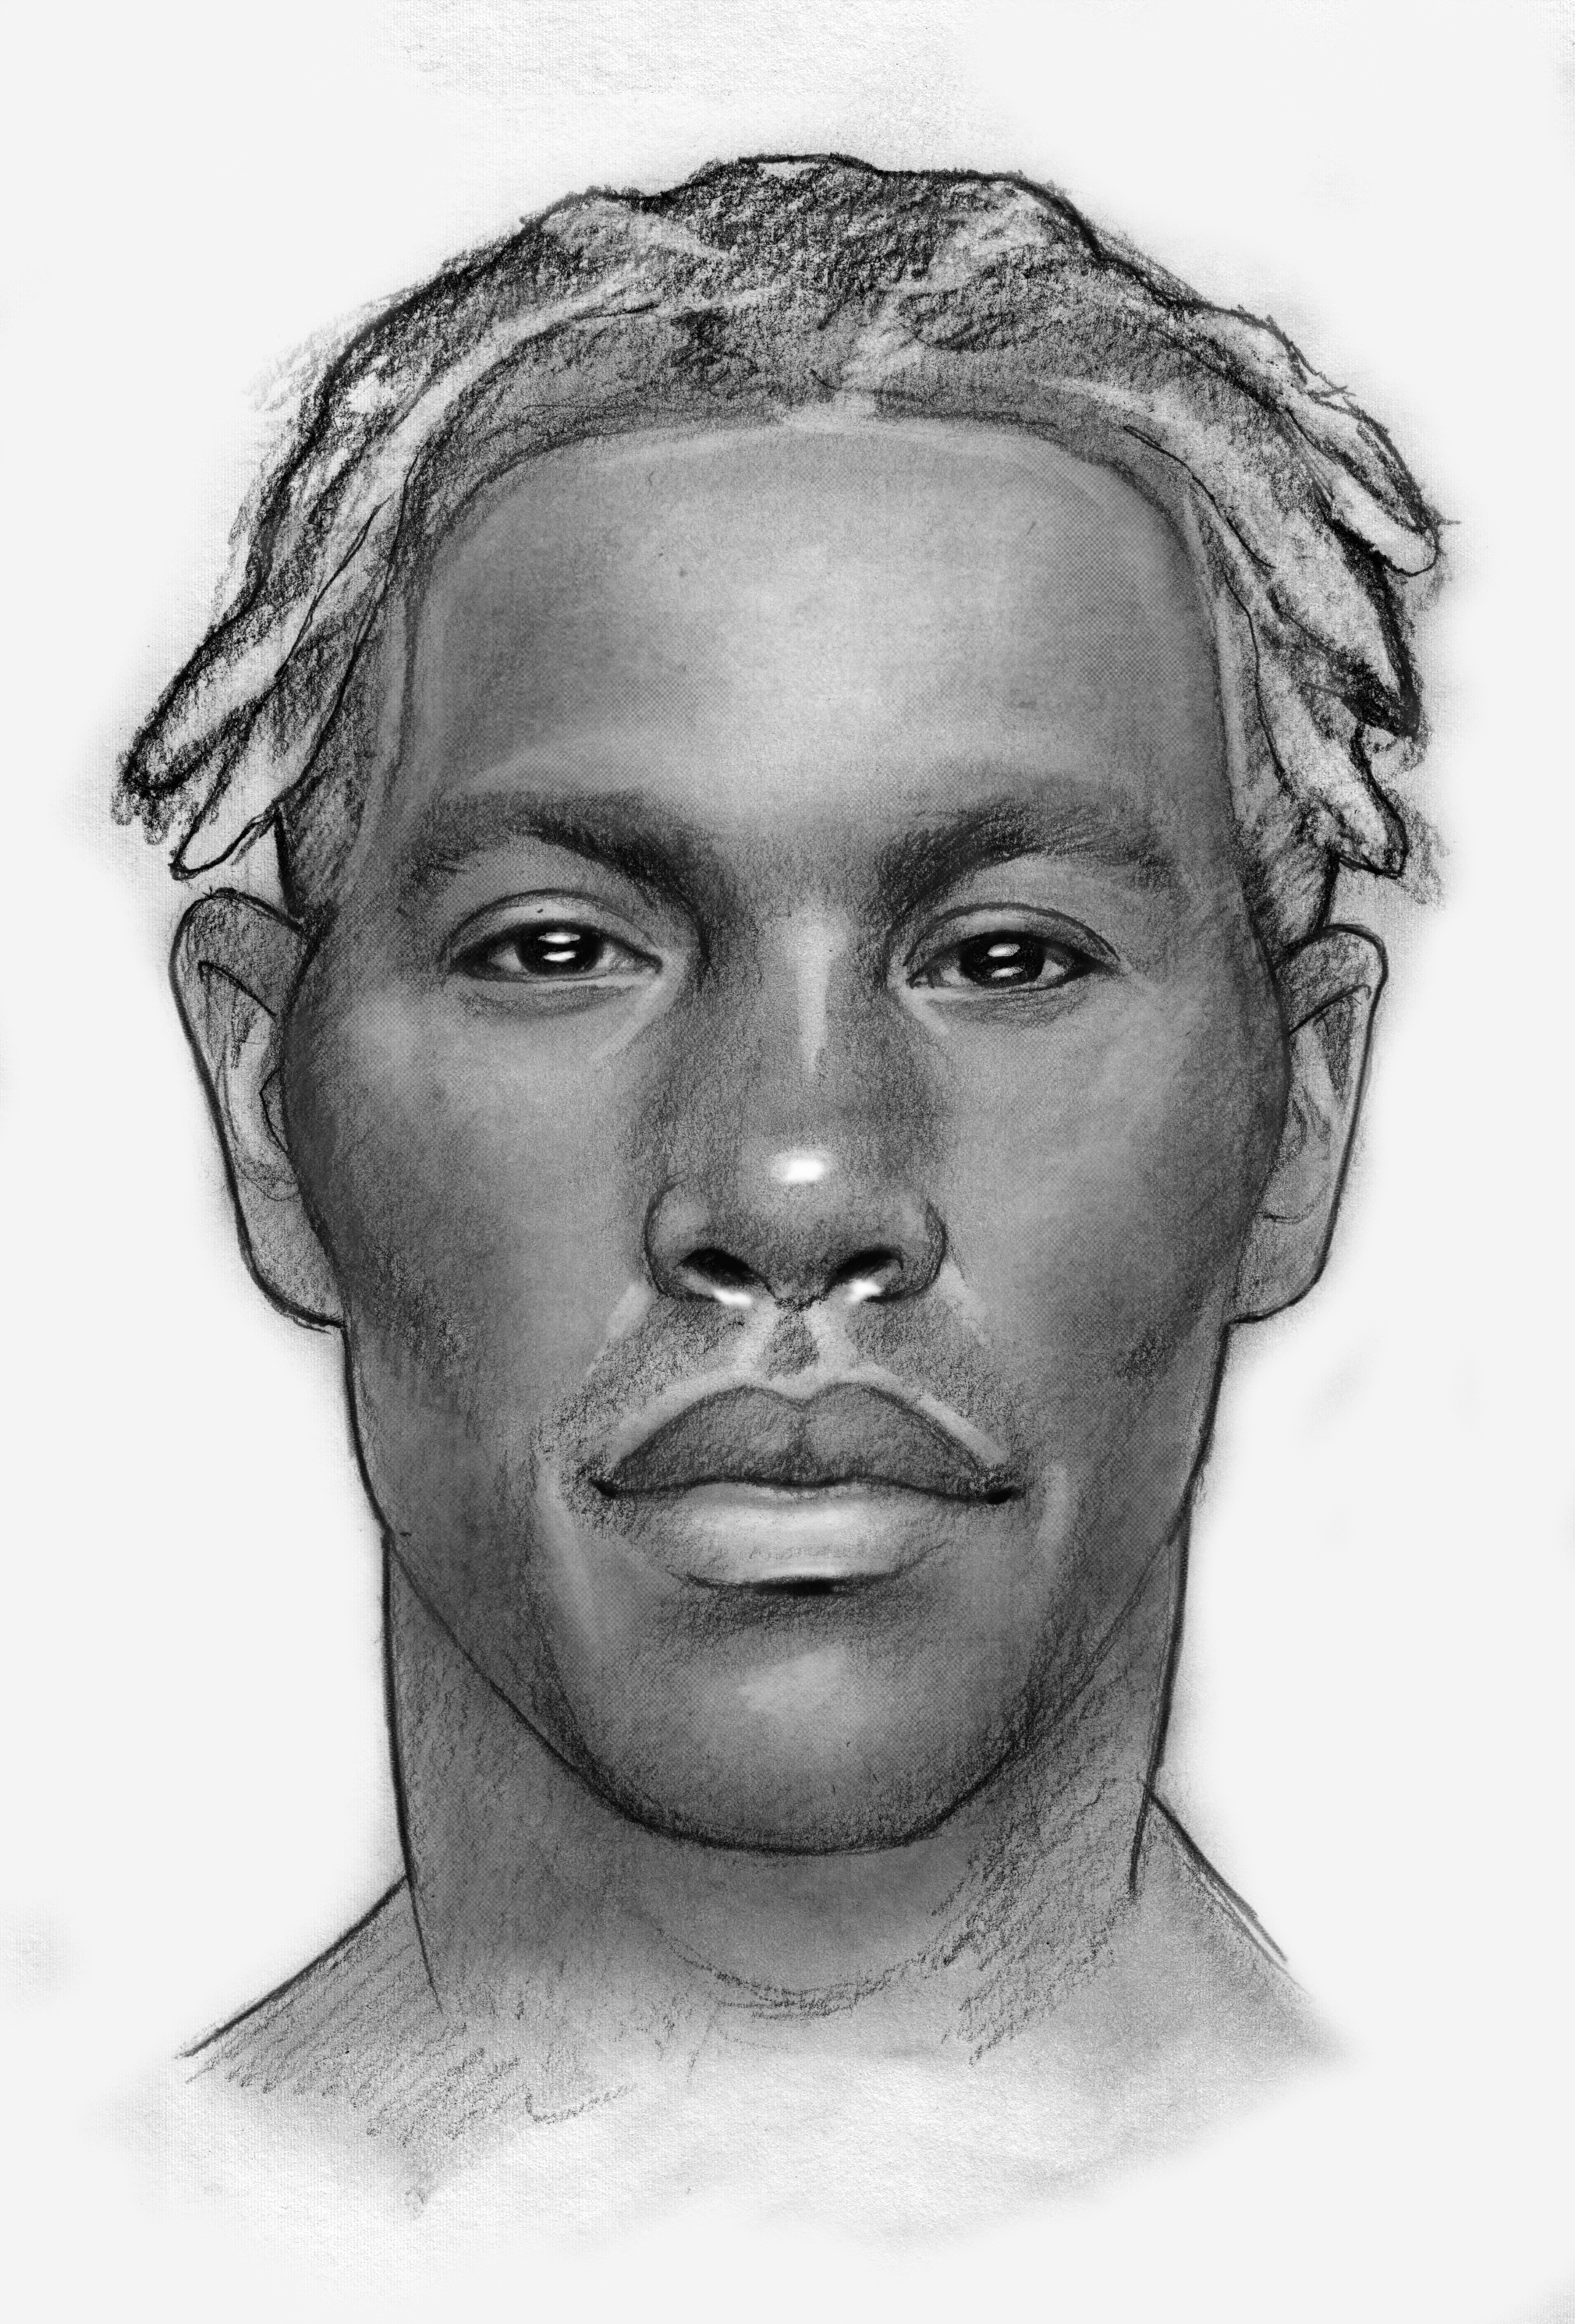 Police have released this sketch of the suspect.(Howard County police)